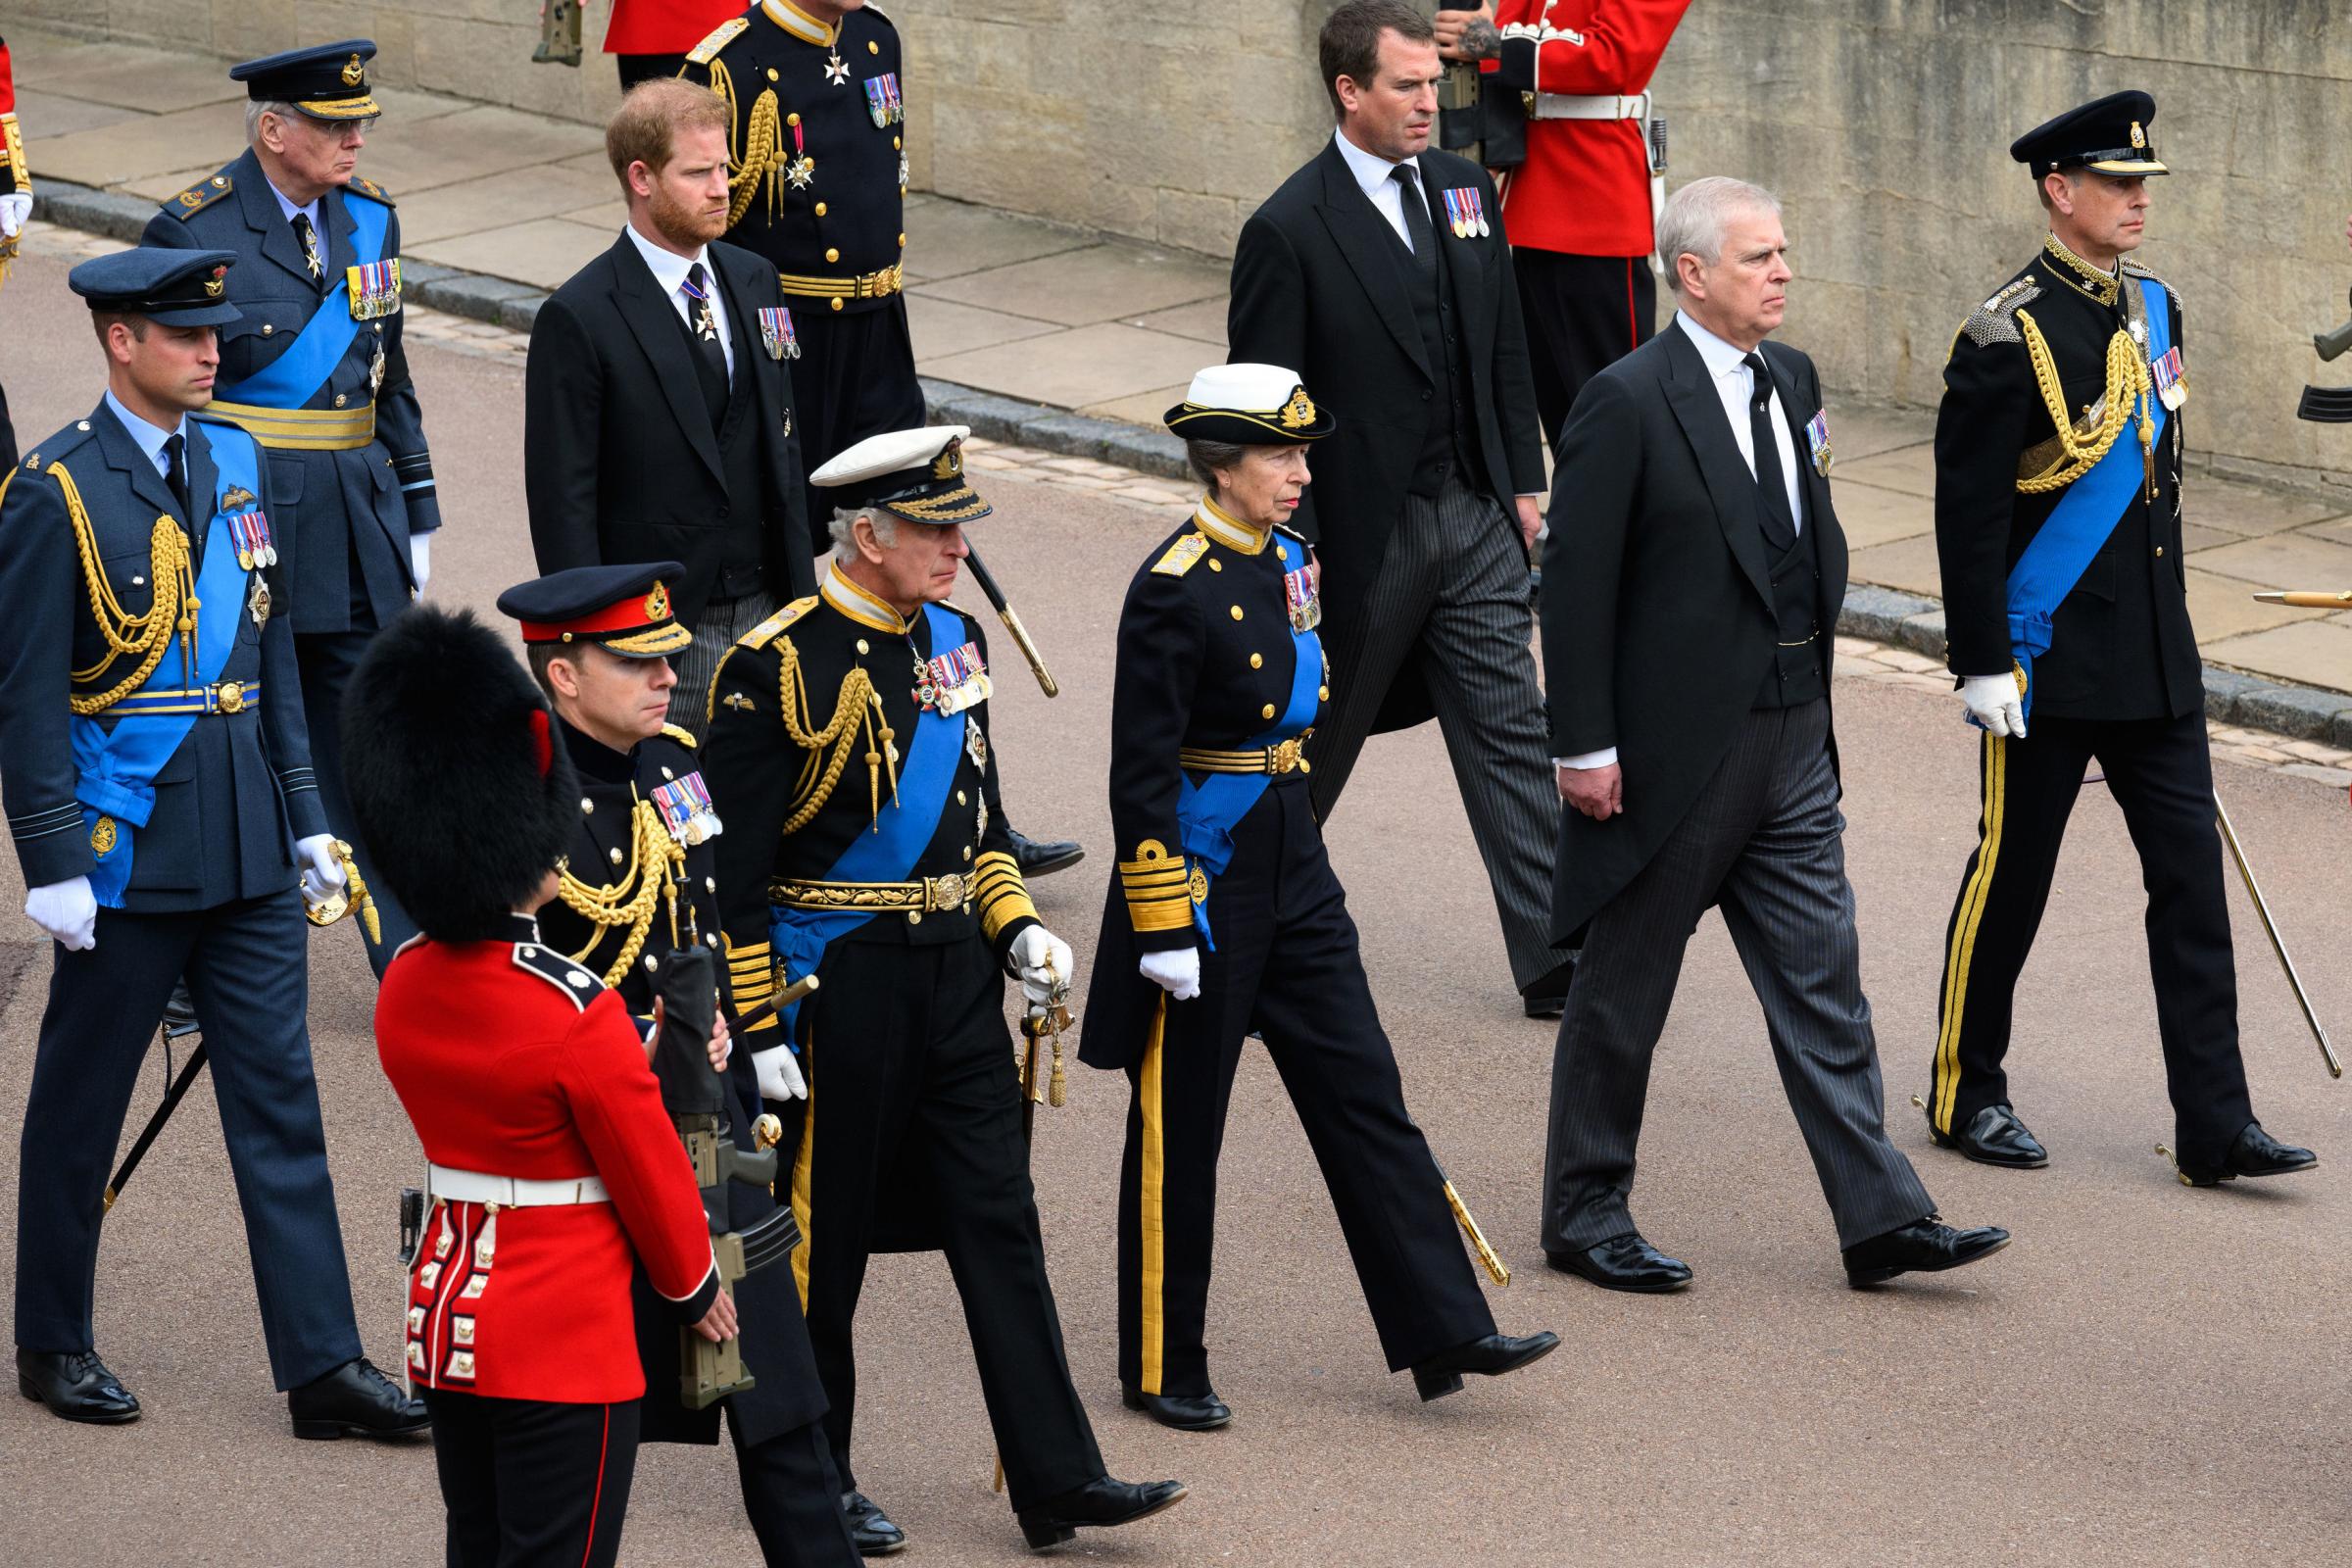 King Charles III, the Princess Royal, the Duke of York, the Earl of Wessex, the Prince of Wales, the Duke of Sussex, Peter Phillips and the Duke of Gloucester follow the coffin of Queen Elizabeth as it arrives at Windsor Castle for the Committal Service